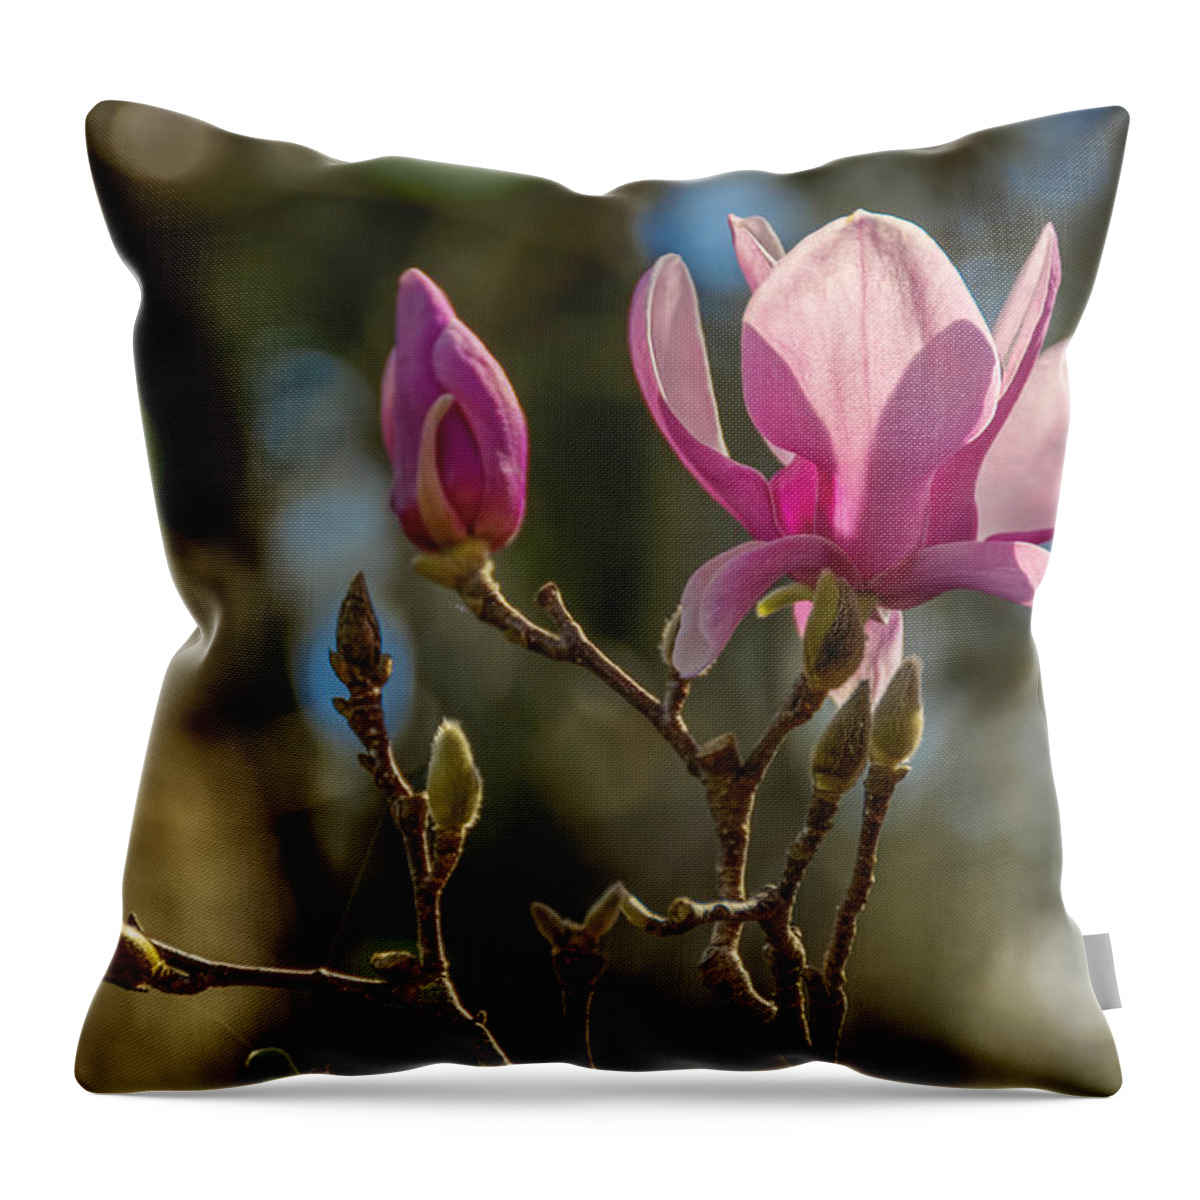 Backlit Throw Pillow featuring the photograph Background Magic by Penny Lisowski